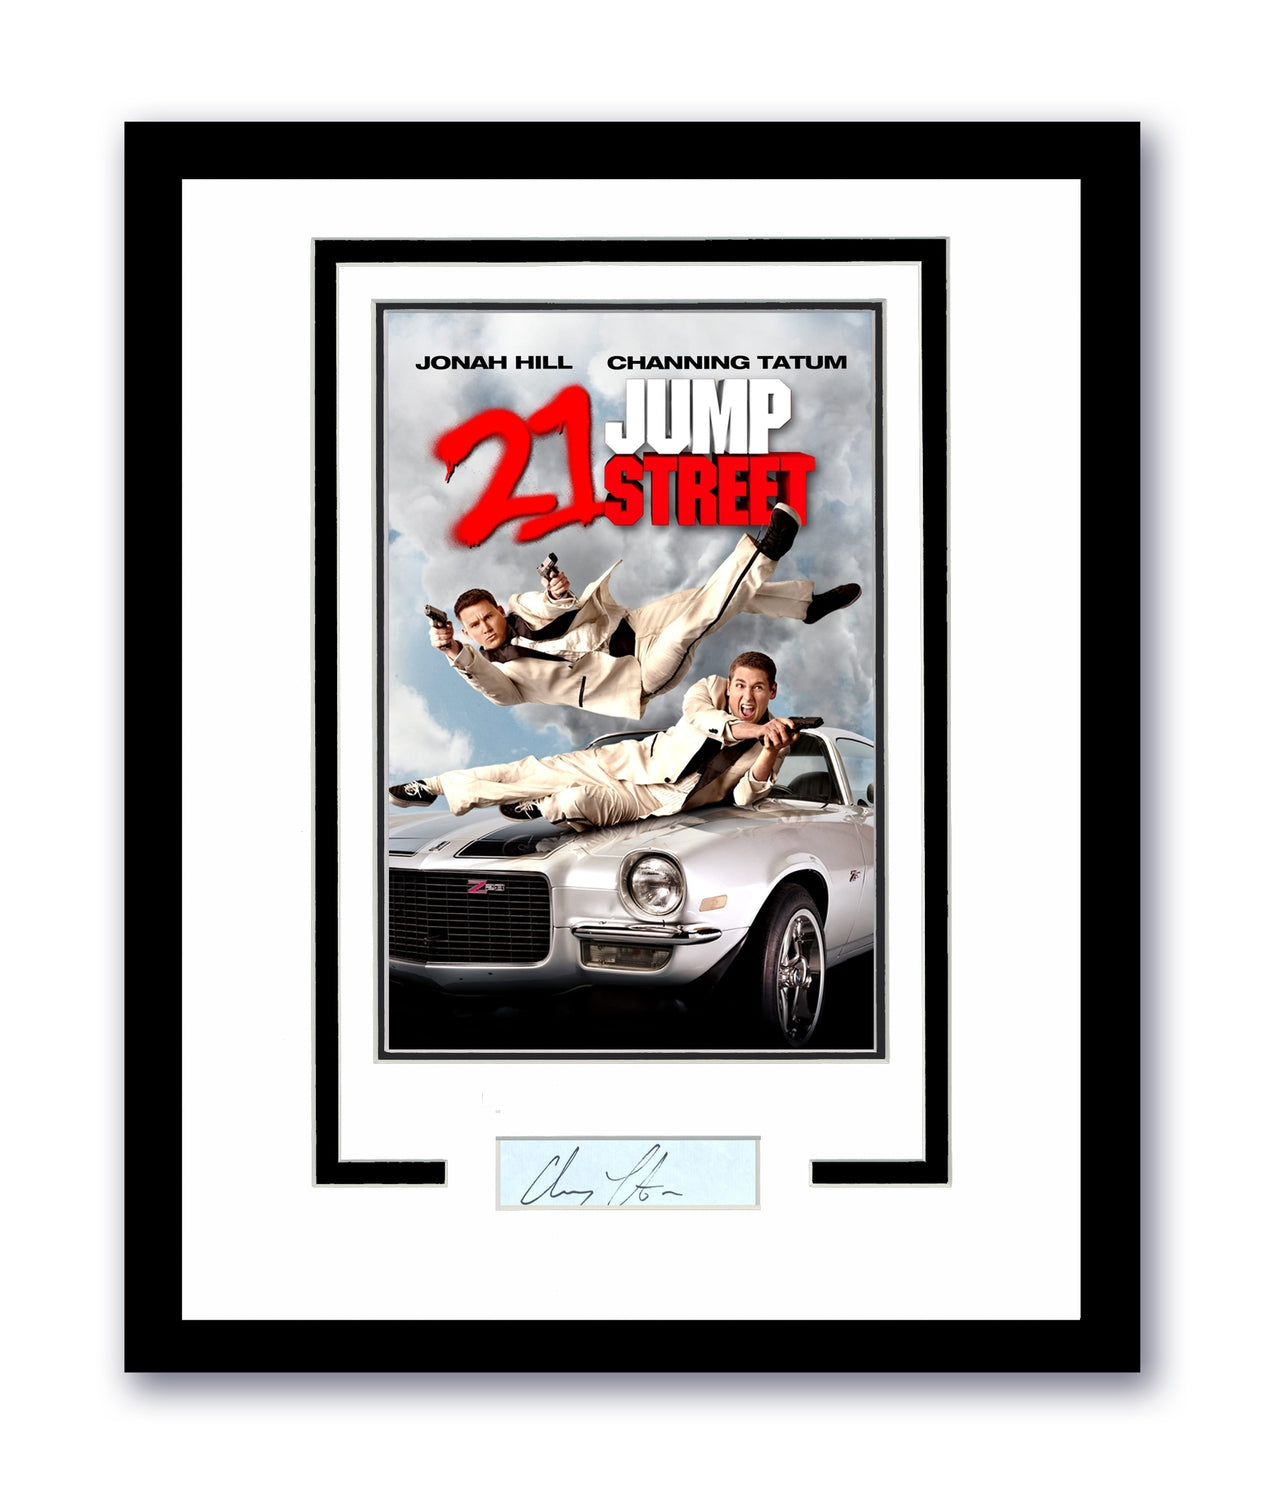 21 Jump Street Channing Tatum Autographed Signed 11x14 Framed Poster Photo ACOA 2